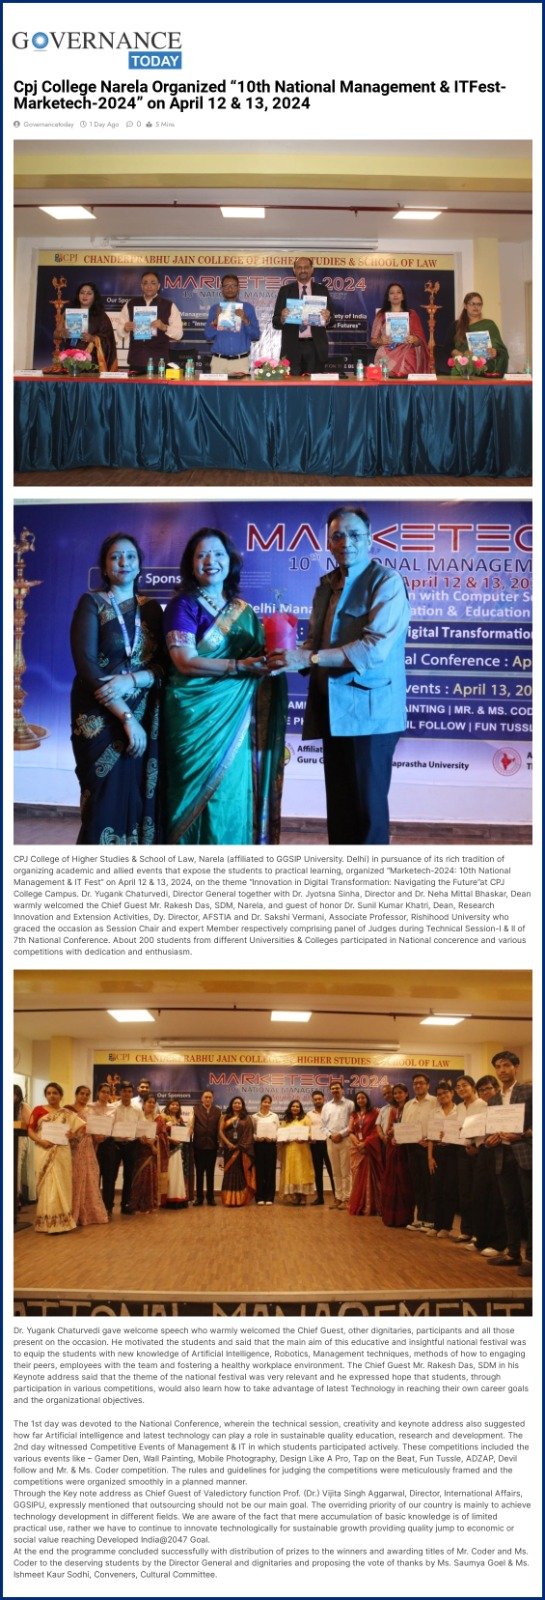 Cpj College Narela Organized “10th National Management & ITFest- Marketech-2024” on April 12 & 13, 2024